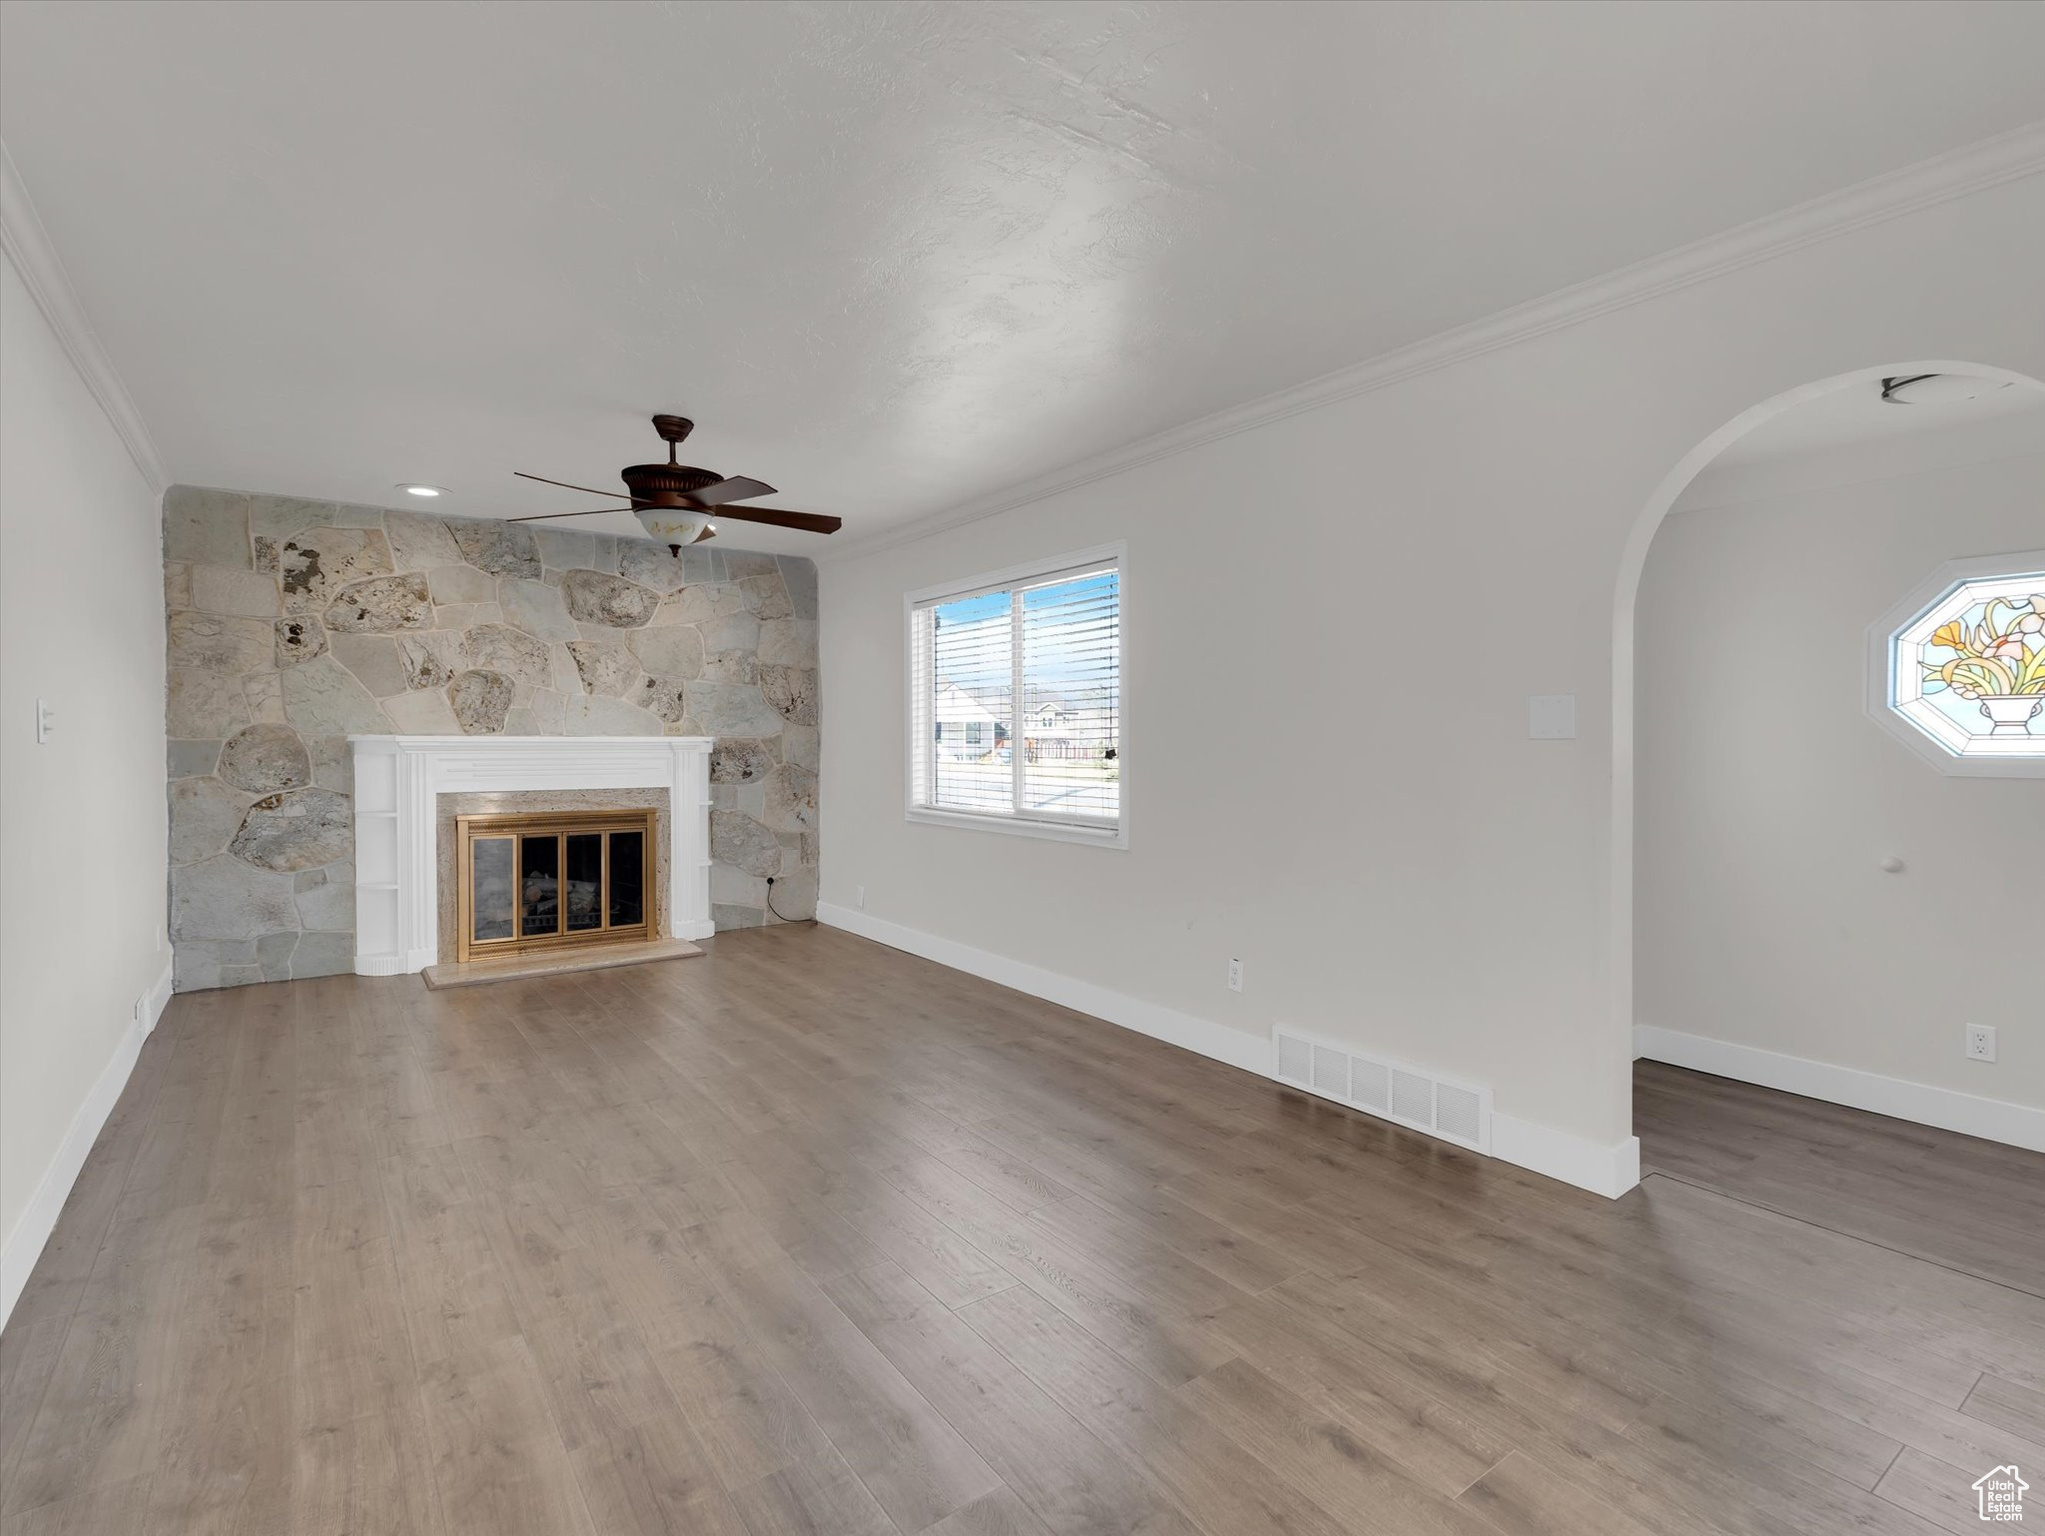 Unfurnished living room featuring ceiling fan, ornamental molding, and hardwood / wood-style flooring